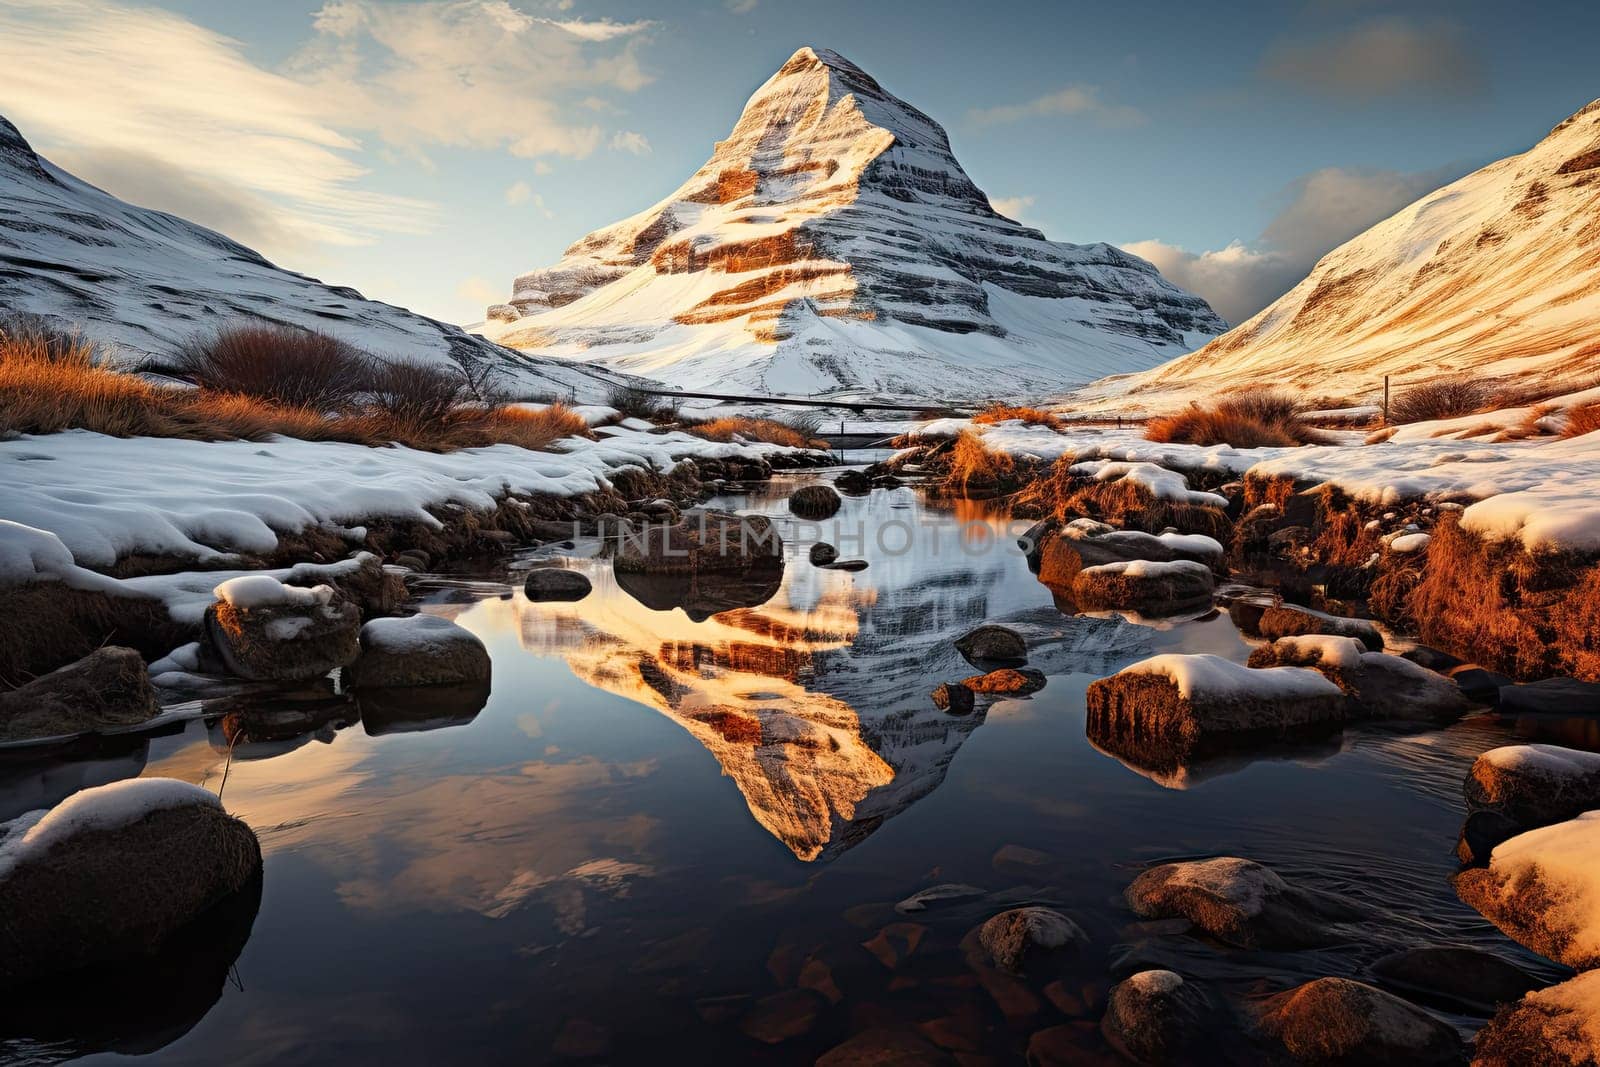 A Majestic Snow-Covered Mountain with a Serene Stream Cutting Through the Landscape